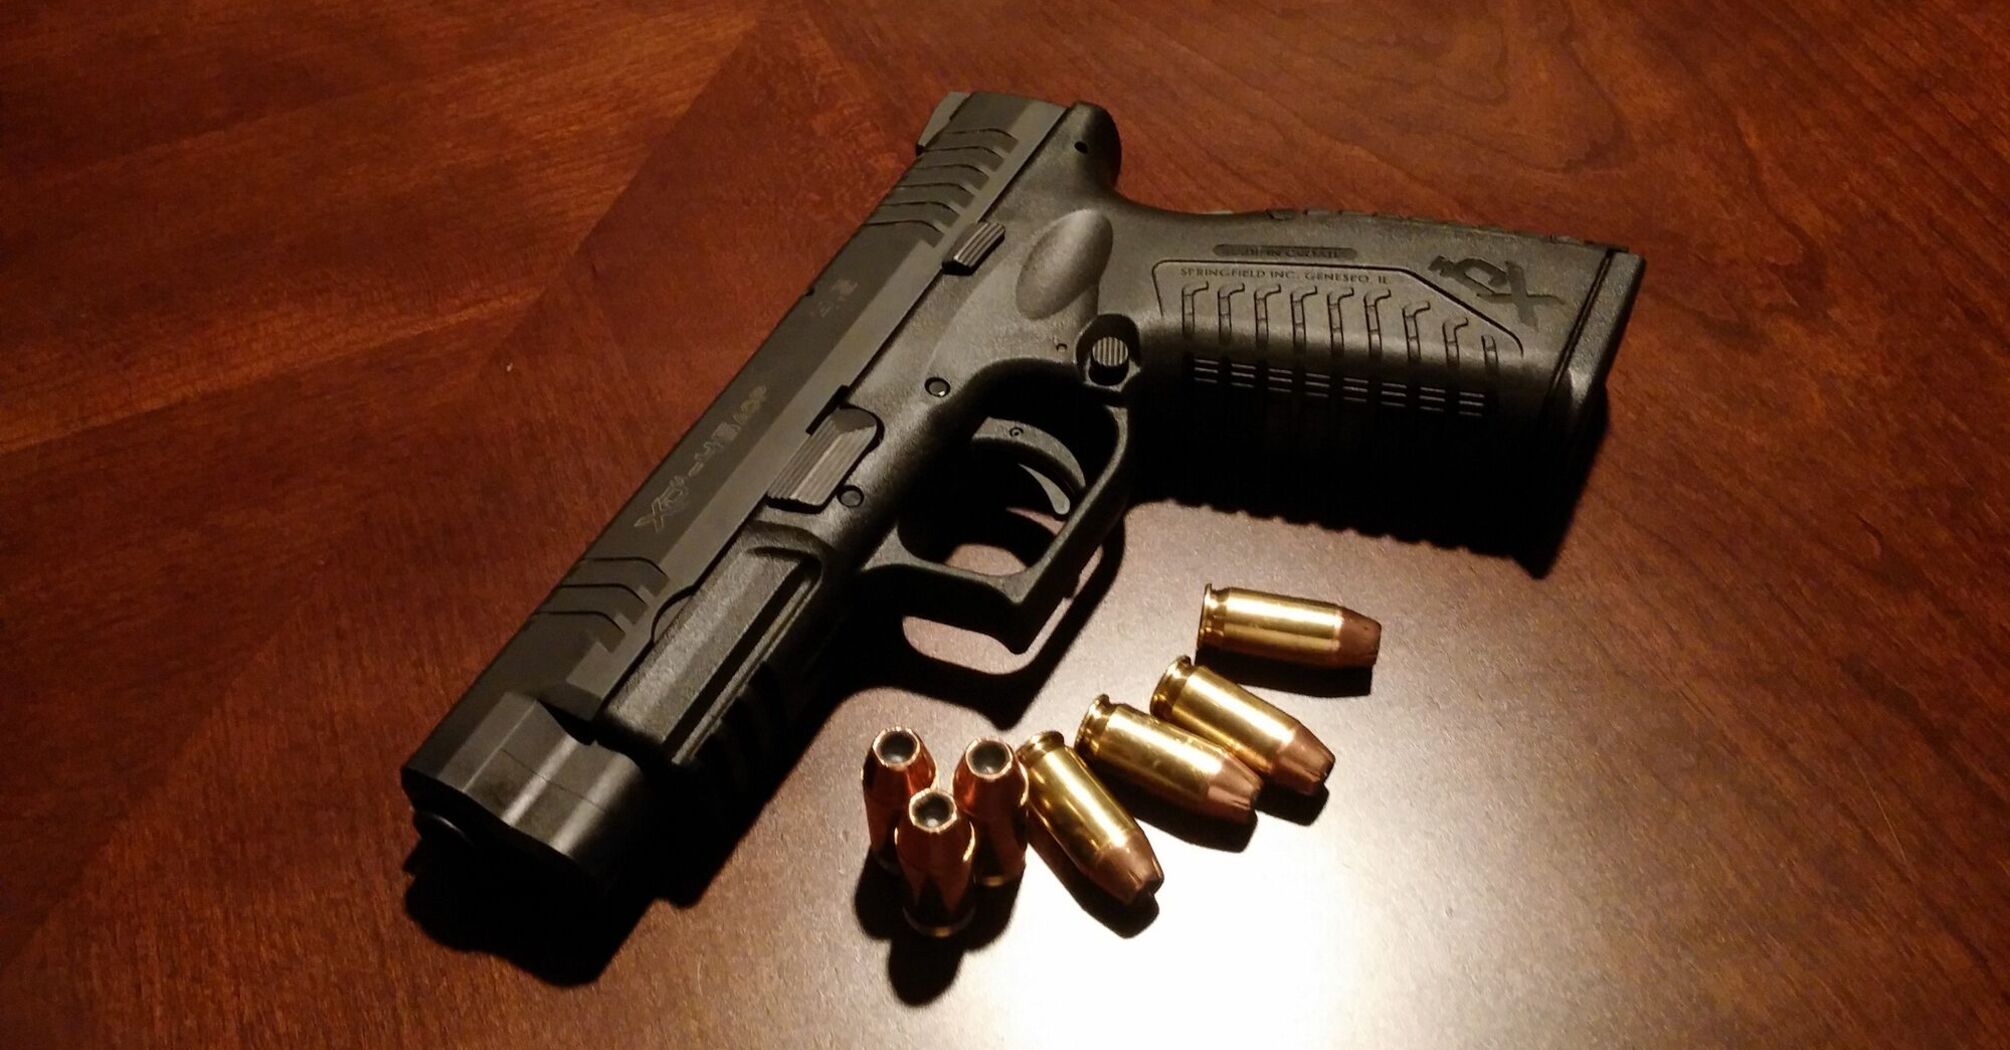 Handgun with a magazine beside it and several bullets scattered on a wooden surface